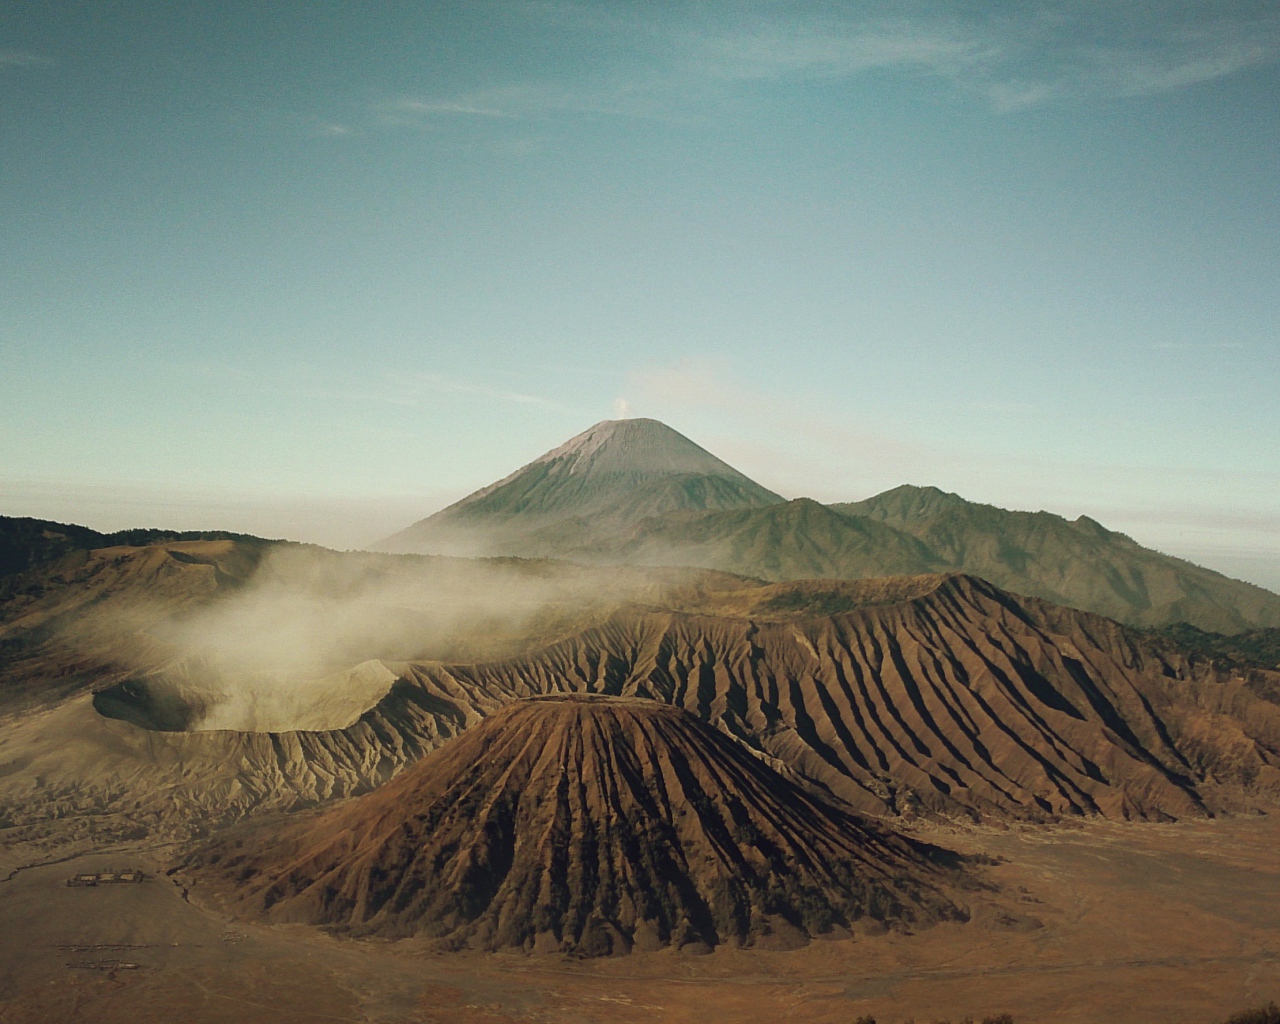 Craters of the volcano Bromo, Indonesia